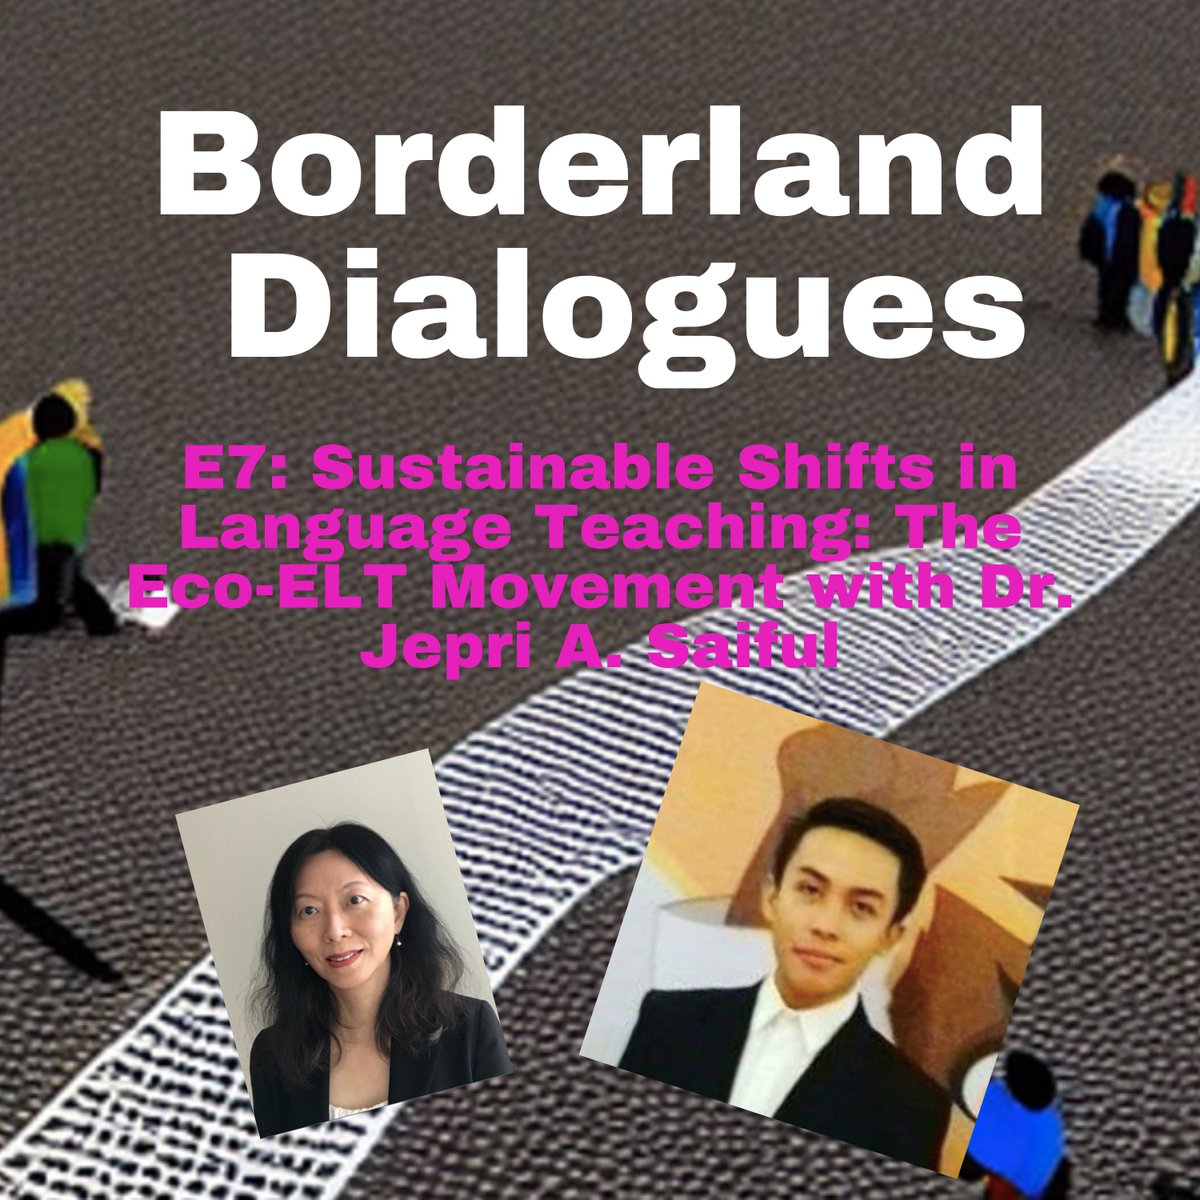 In this compelling episode, Dr. Jepri Ali Saiful delves into the unique role of Eco-ELT in reshaping and transforming perspectives, approaches and practices within TESOL and beyond. tinyurl.com/2tjuf4pv #borderlanddialogues